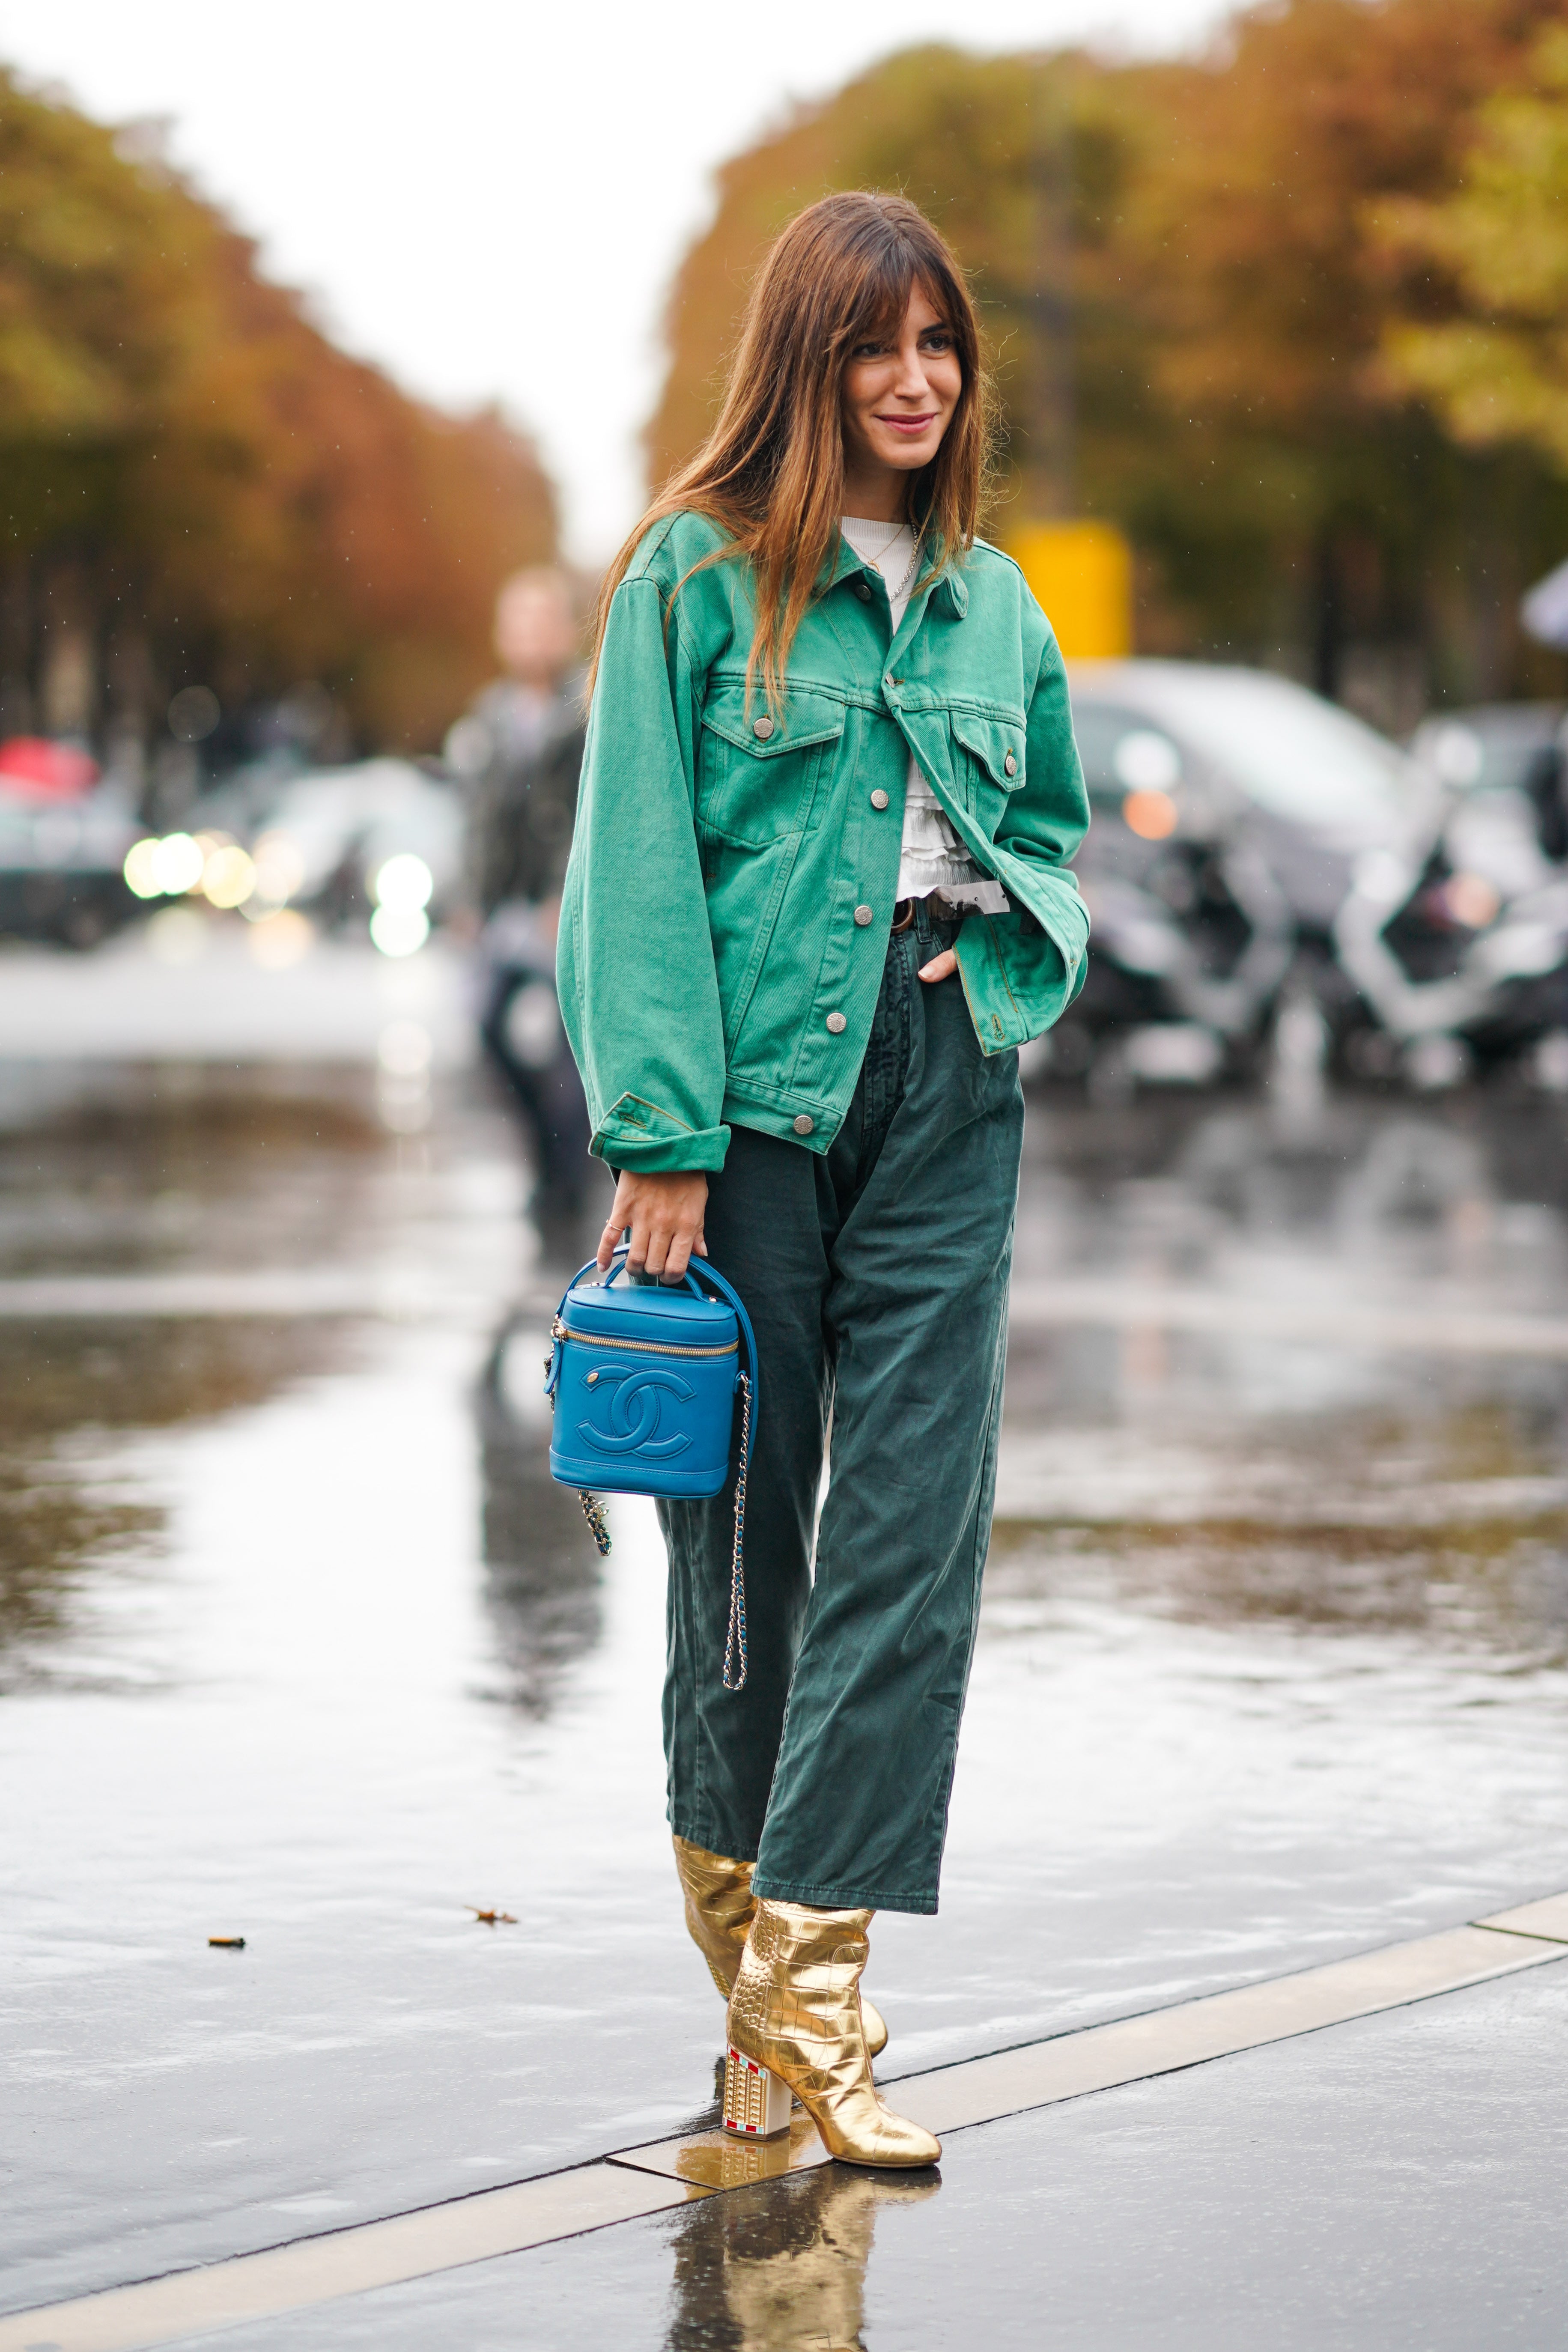 A Colorful Winter Outfit That's Actually Warm - Color & Chic